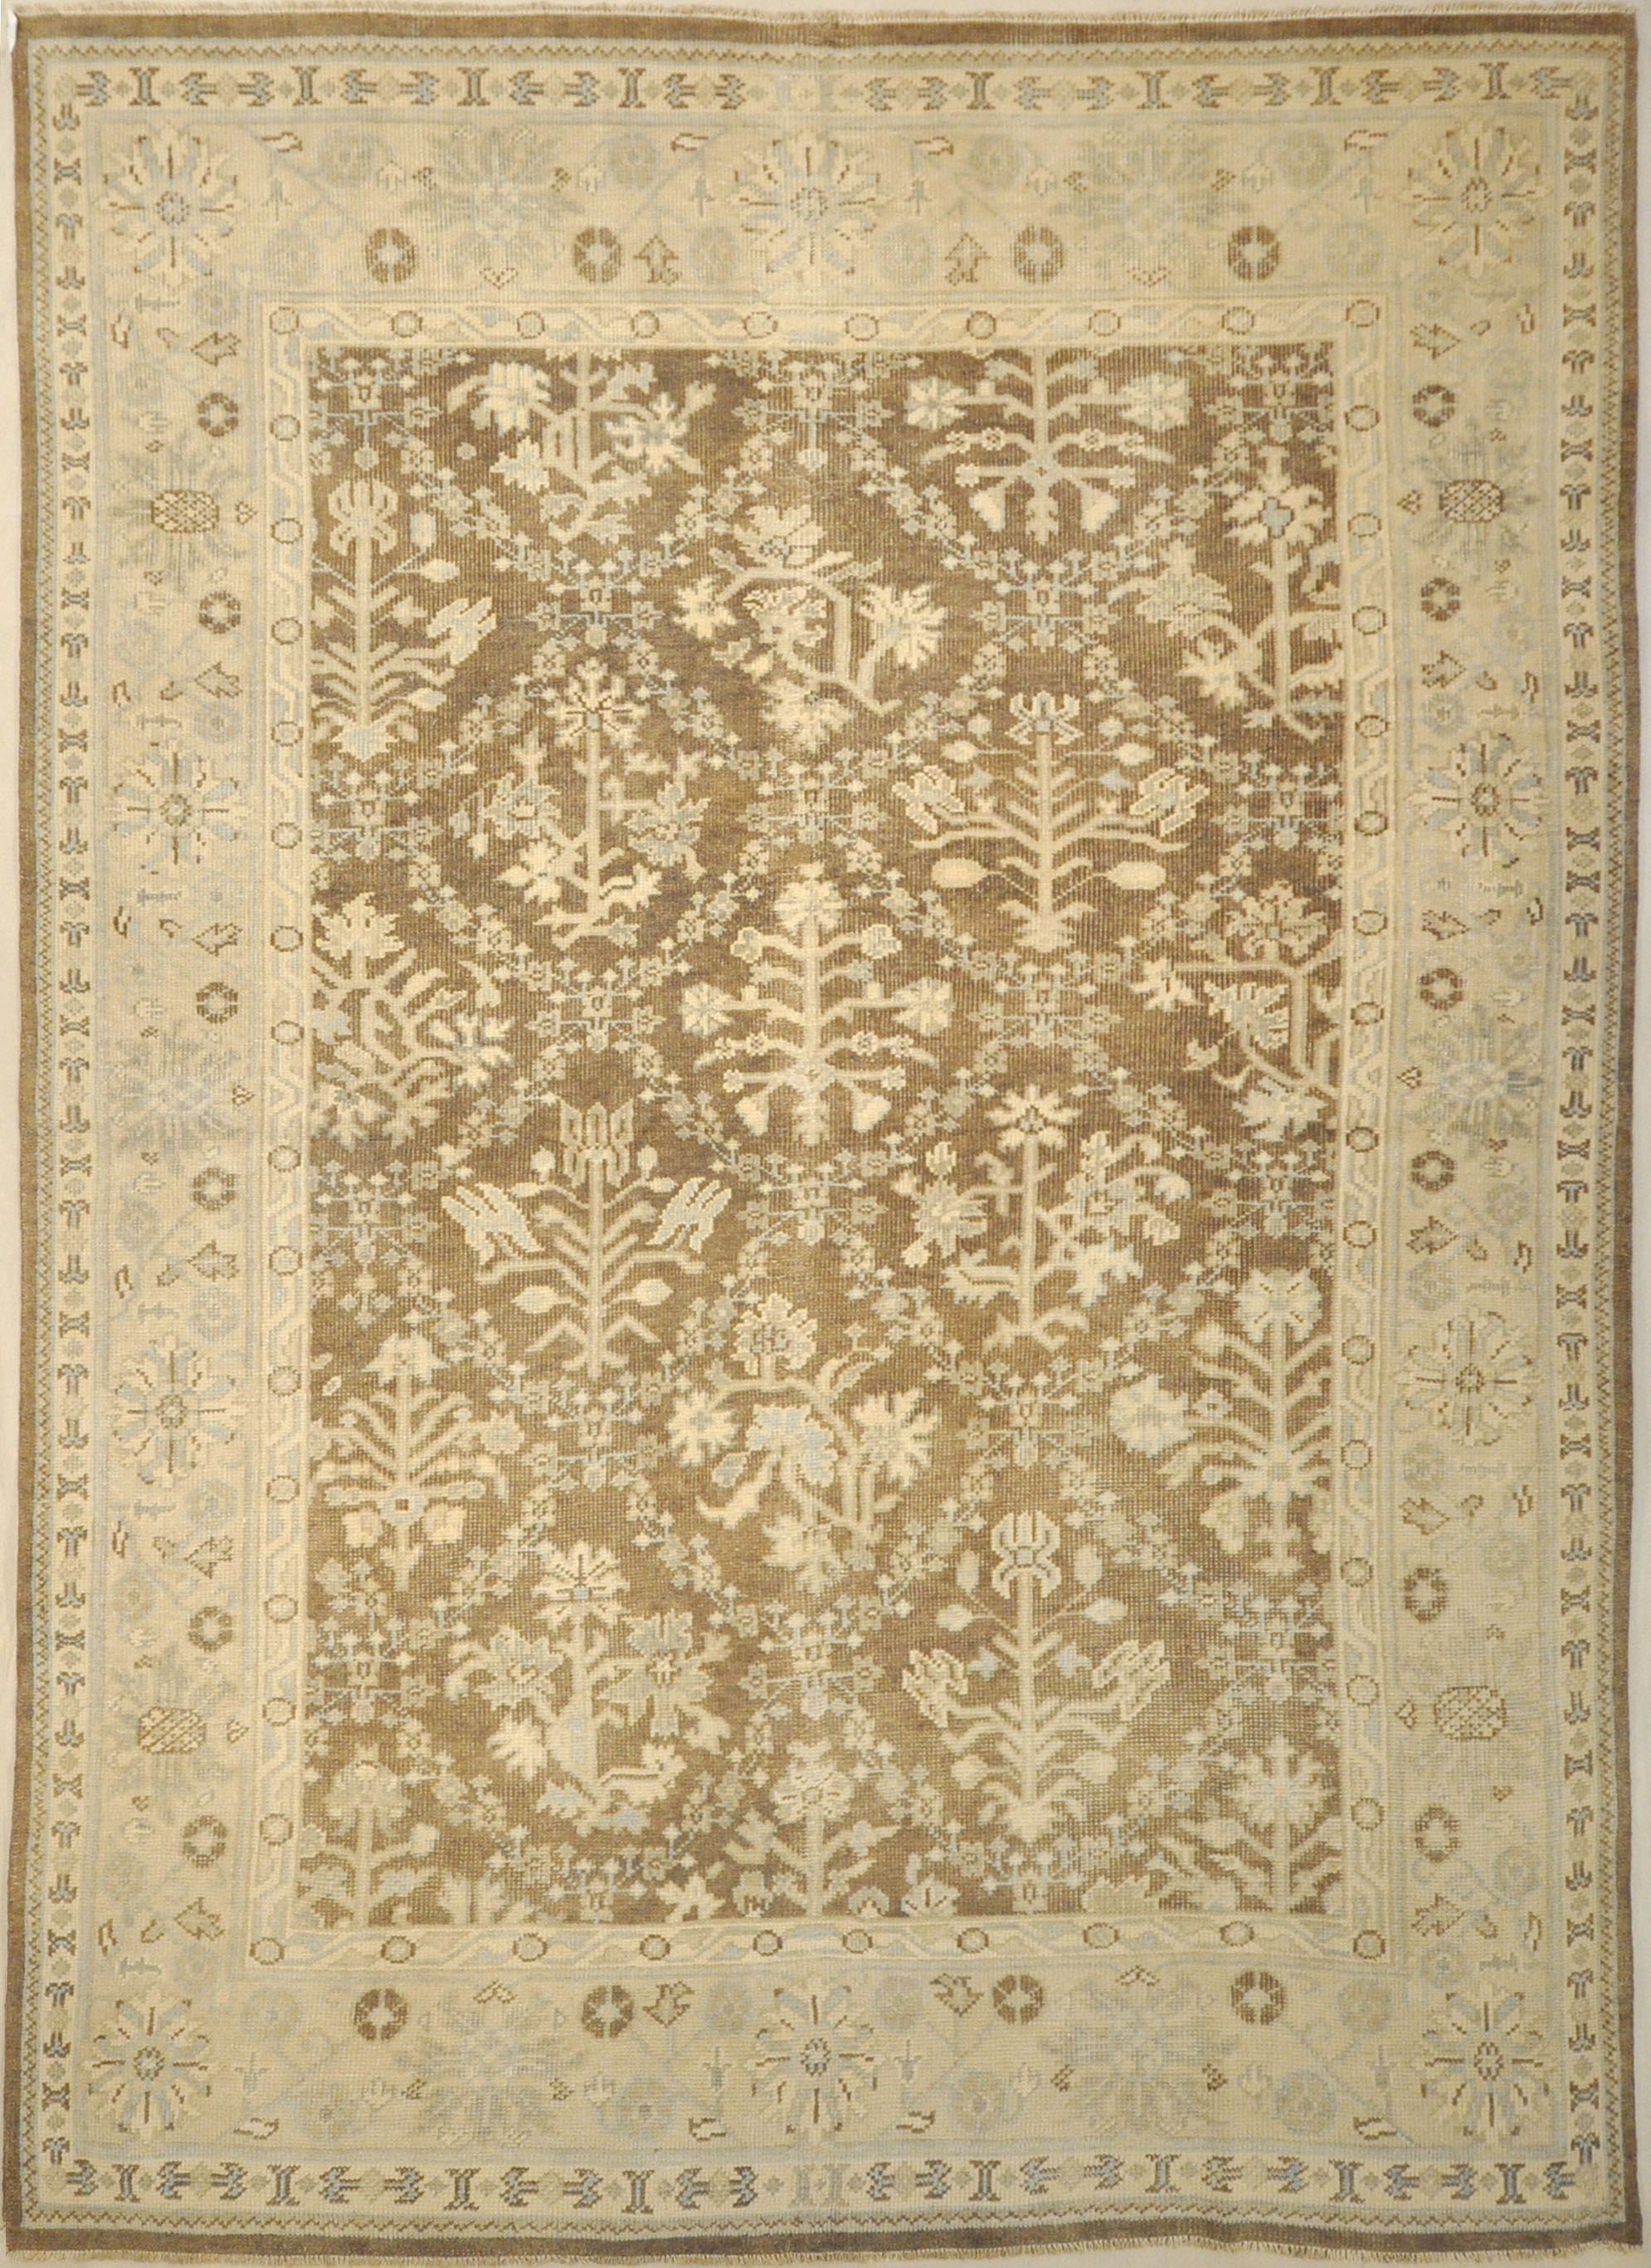 Montecito Oushak Rug 30309. A piece of genuine authentic woven art woven by Ziegler and Company and sold by Santa Barbara Design Center, Rugs and More.